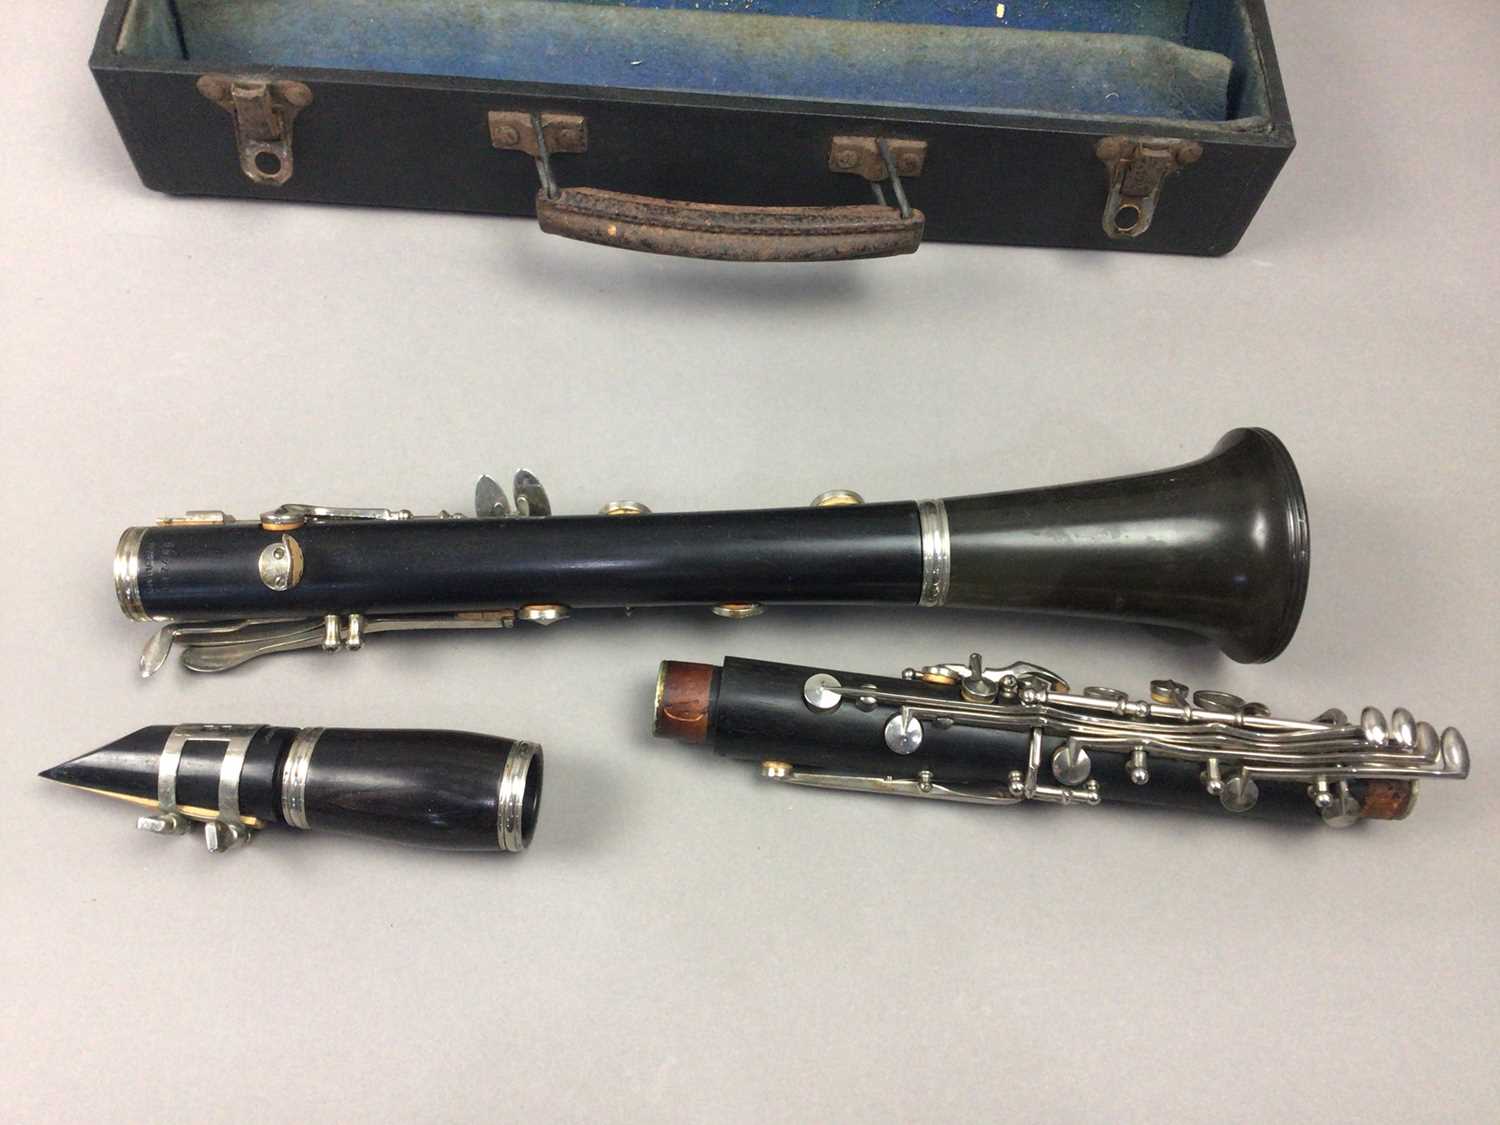 A CLARINET - Image 3 of 3